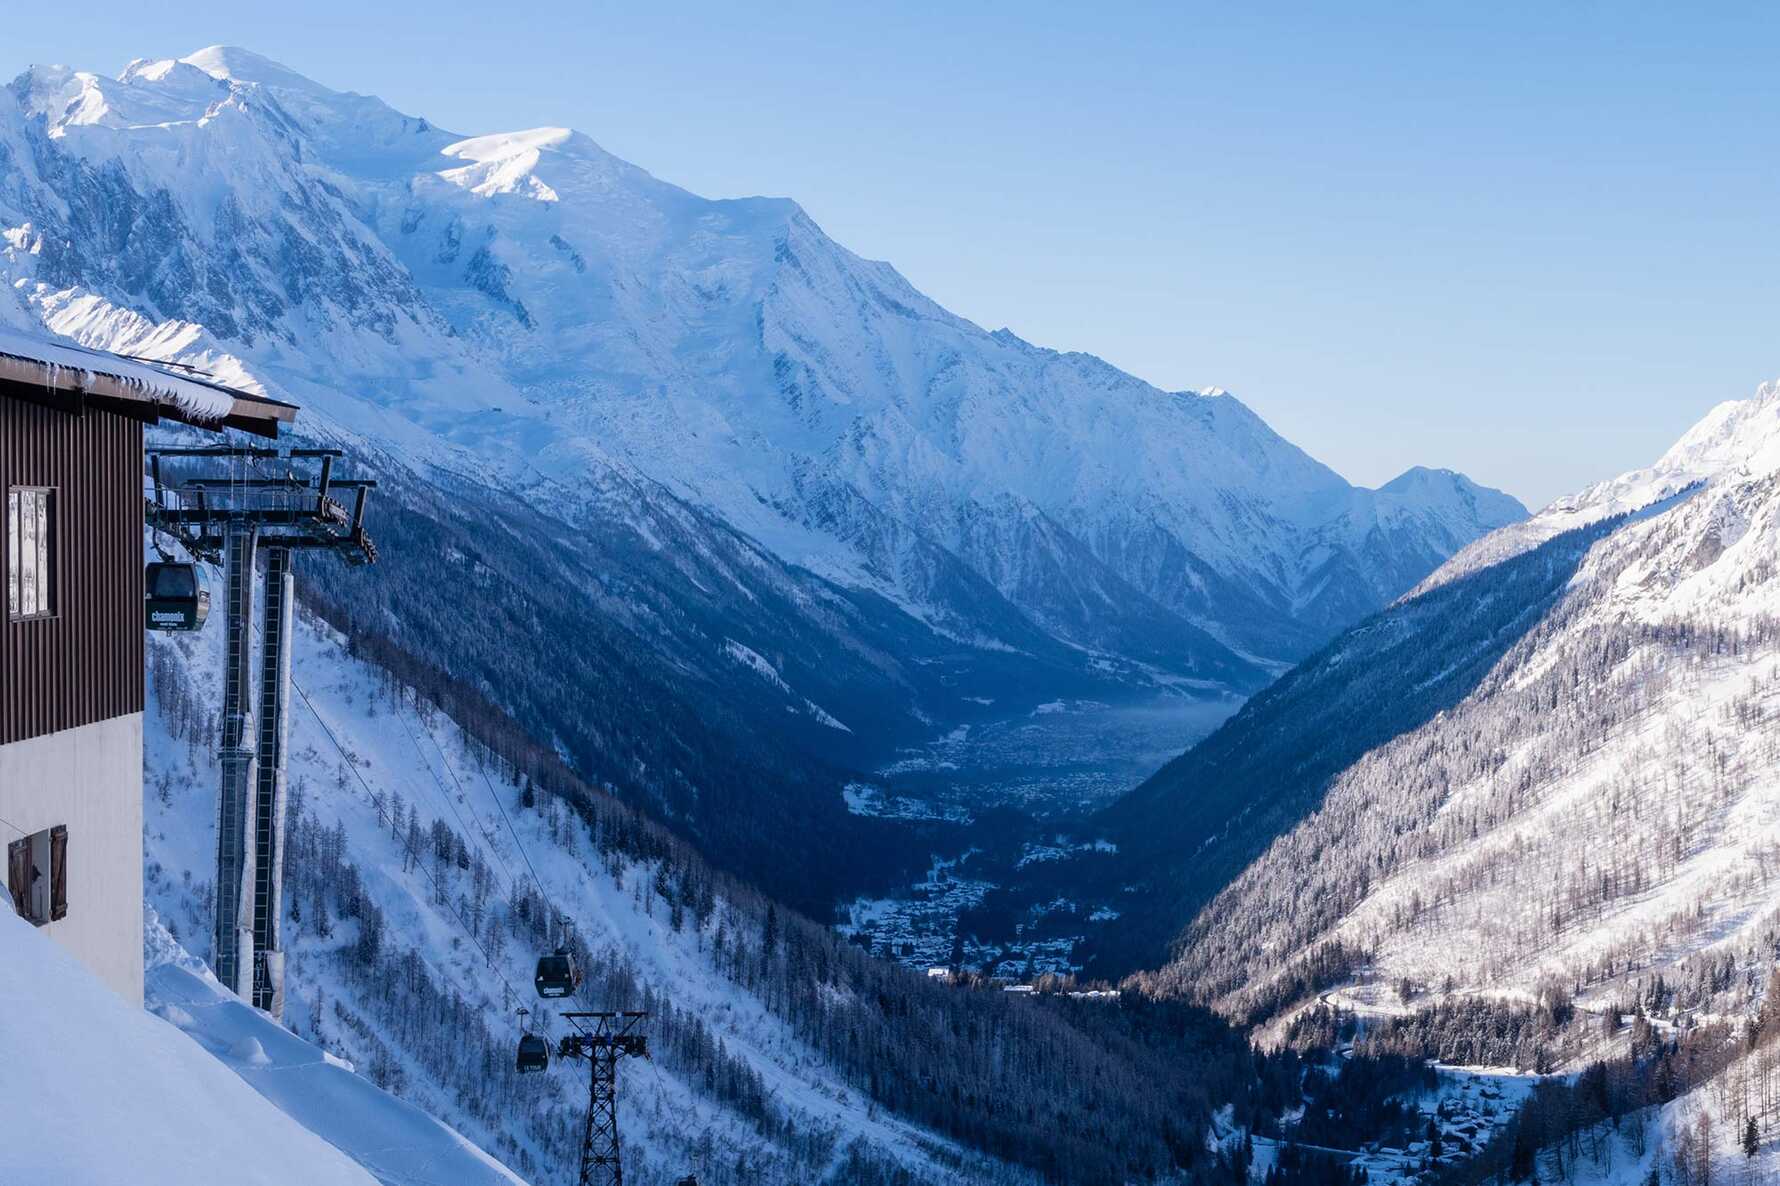 A view of the Chamonix valley from Le Tour ski area